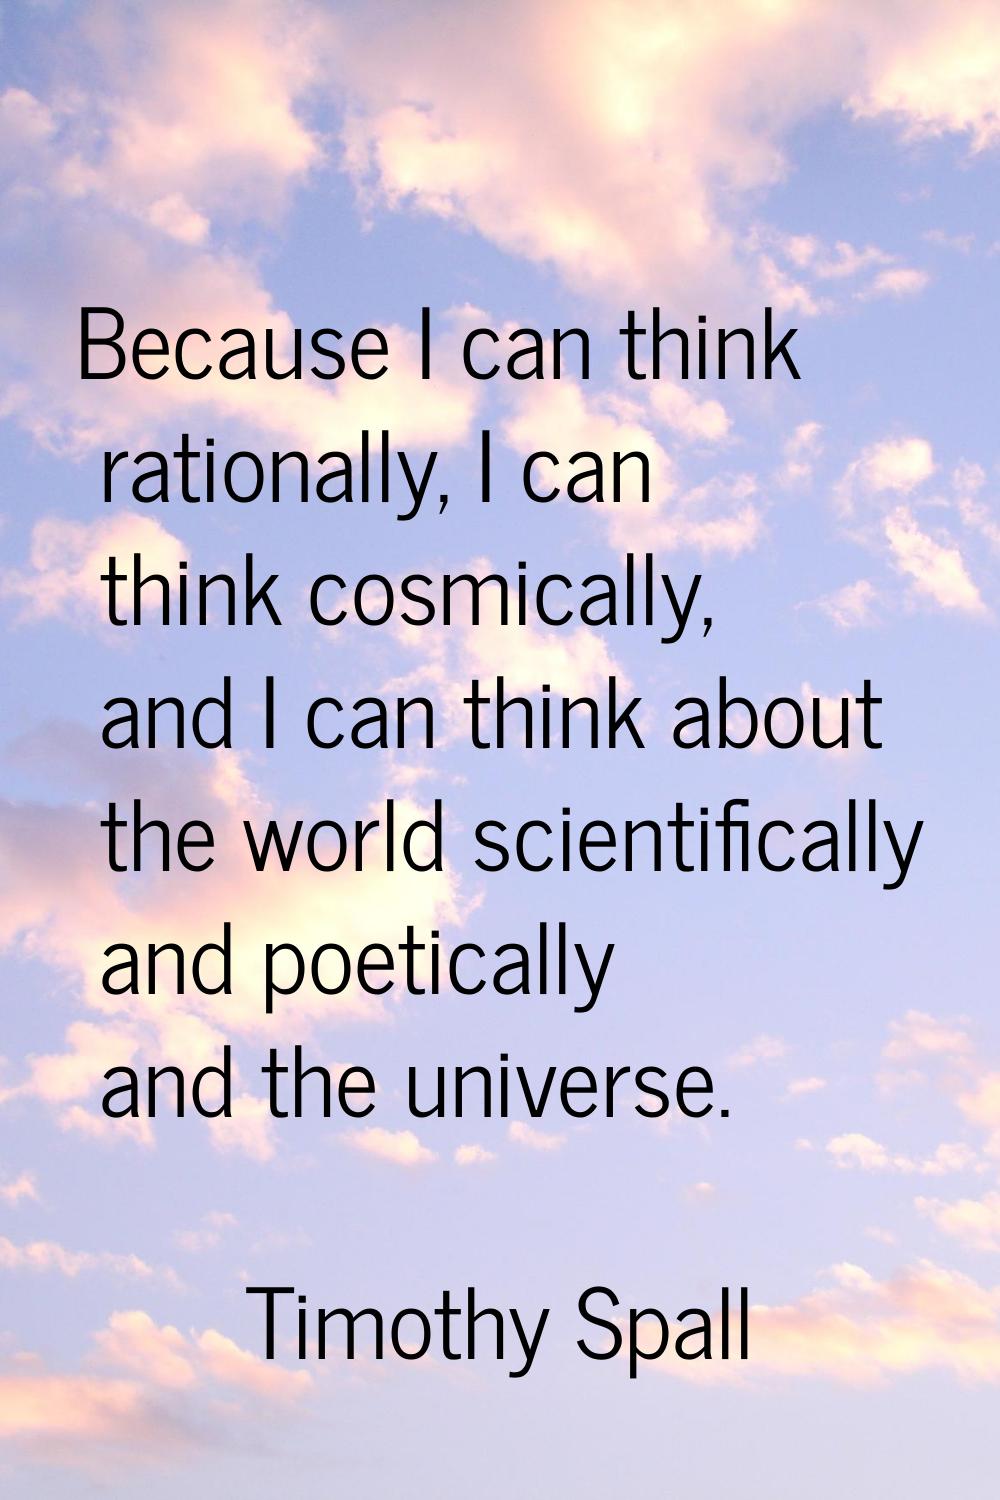 Because I can think rationally, I can think cosmically, and I can think about the world scientifica